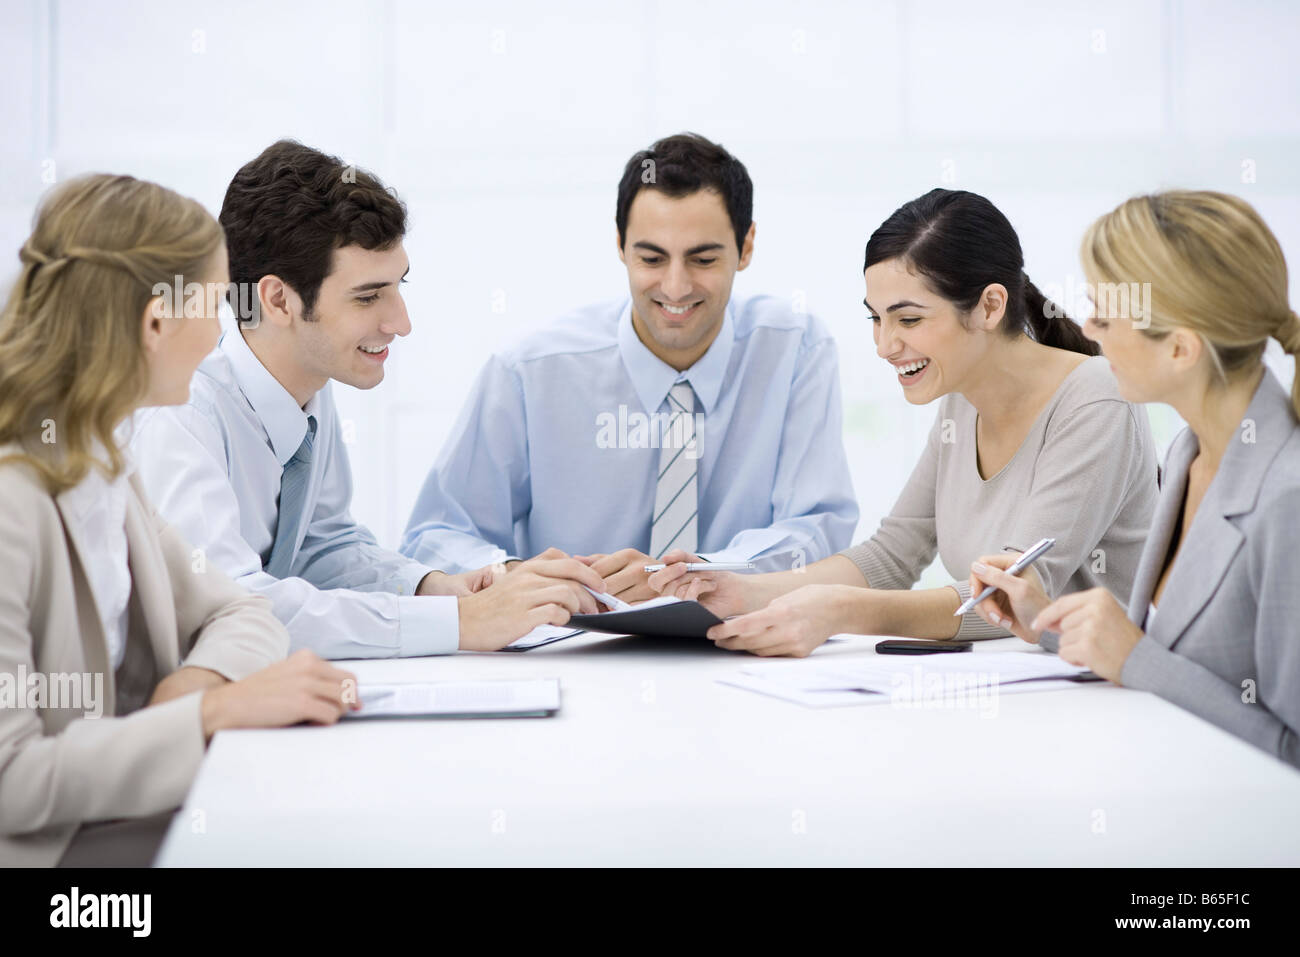 Group of professionals sitting at table, discussing document Stock Photo